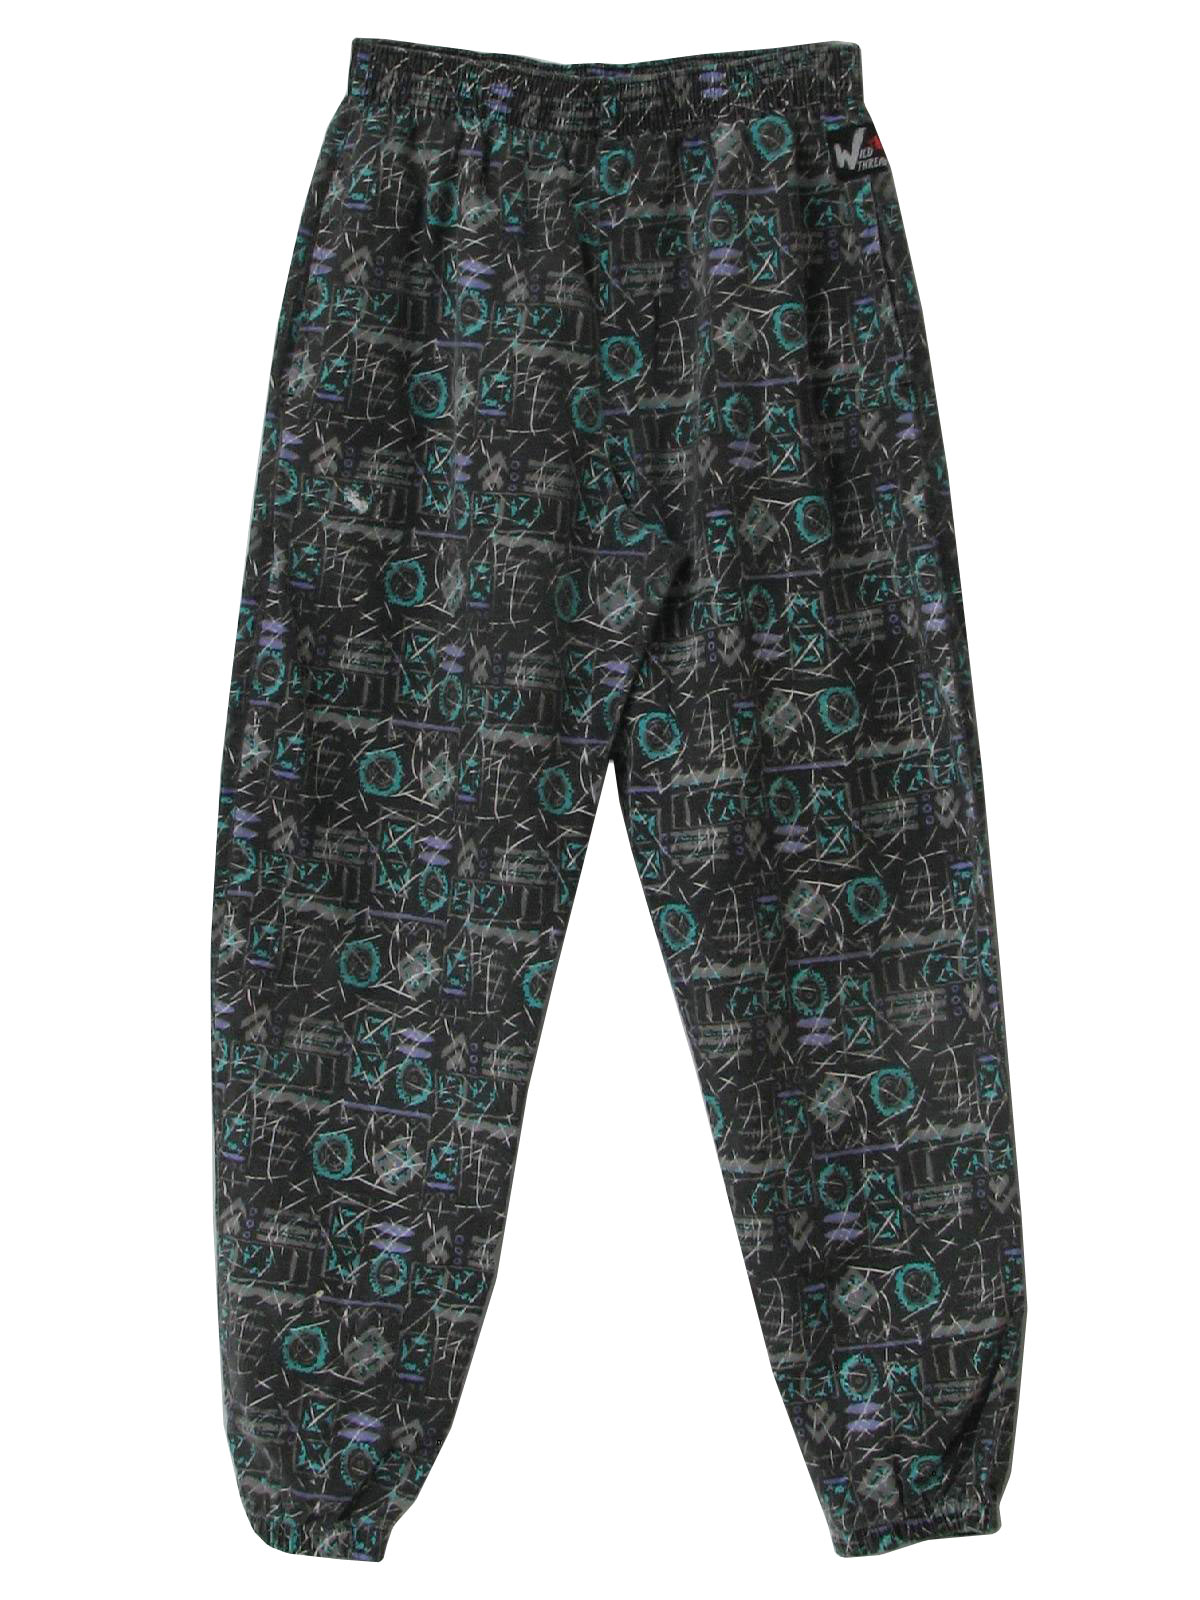 Vintage 1980's Pants: 80s -Wild Threads- Mens grey background with ...